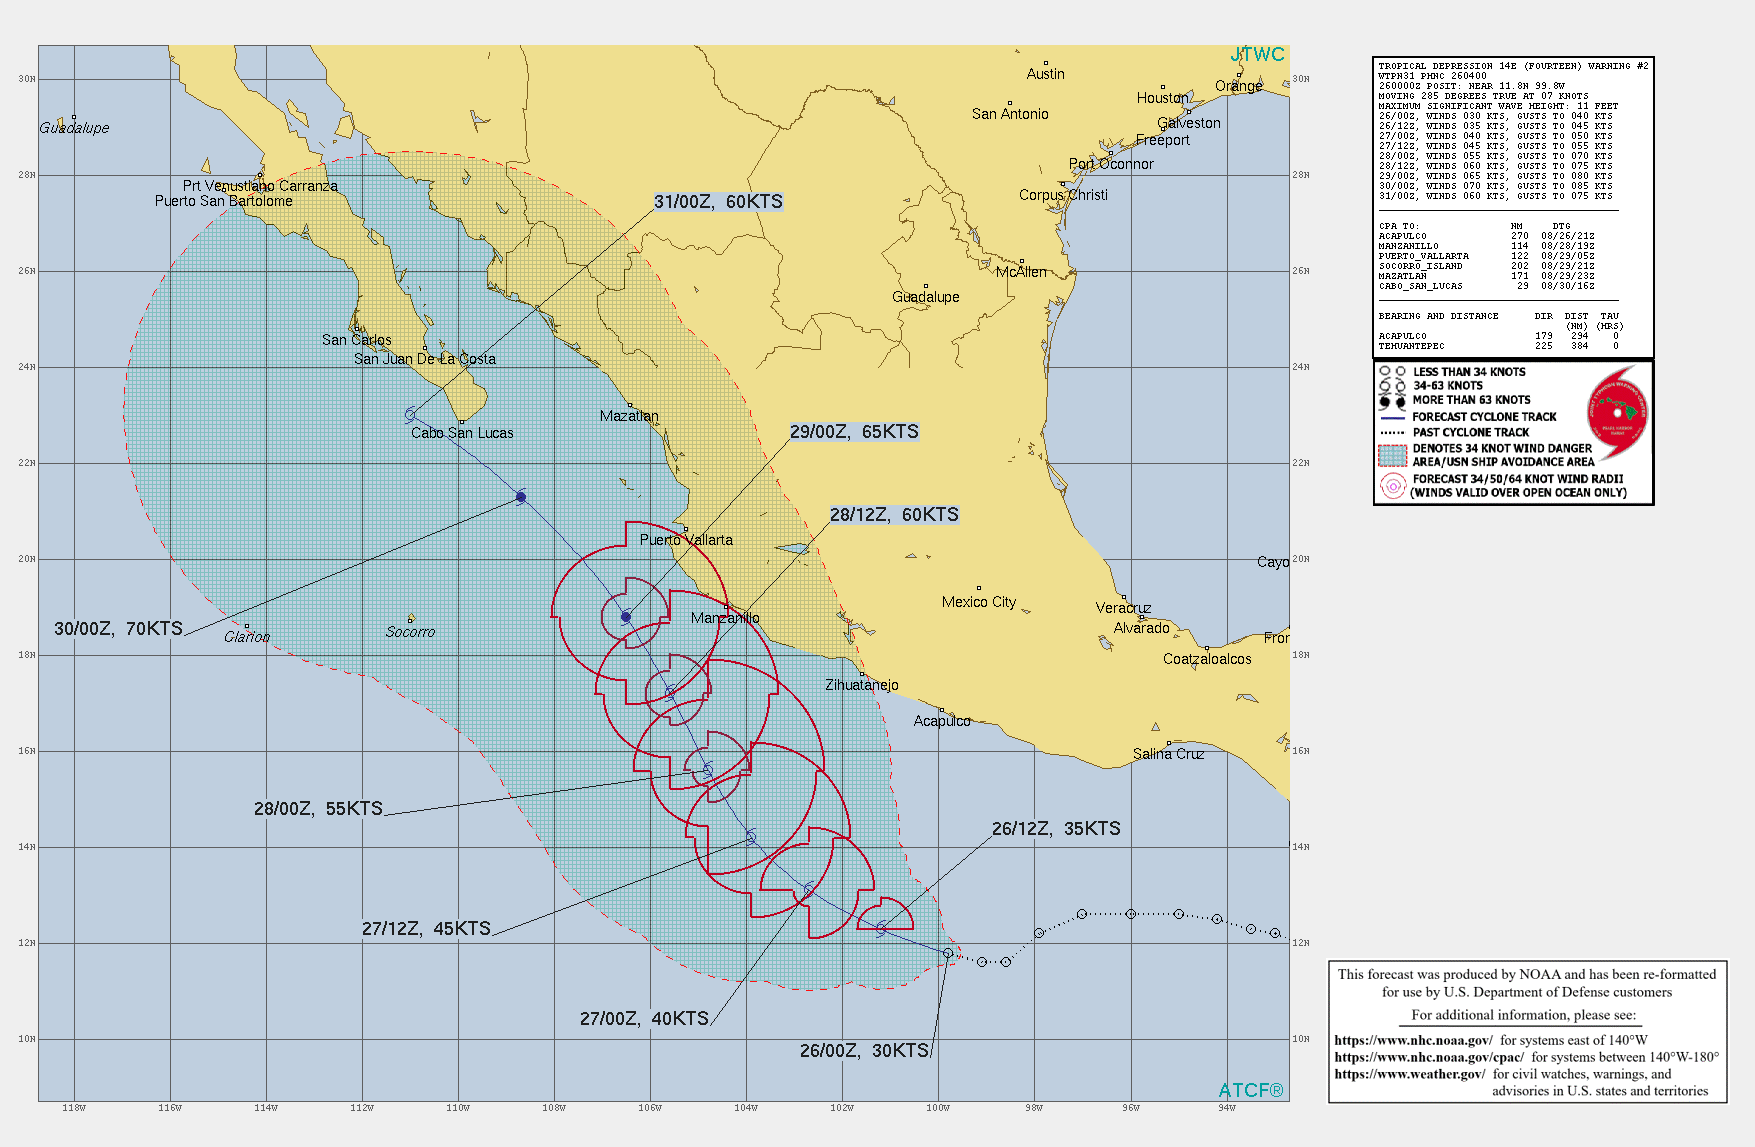 EASTERN PACIFIC. TD 14E. WARNING 2 ISSUED AT 26/04UTC. INTENSITY IS FORECAST TO REACH 65KNOTS/CAT 1 BY 29/00UTC.